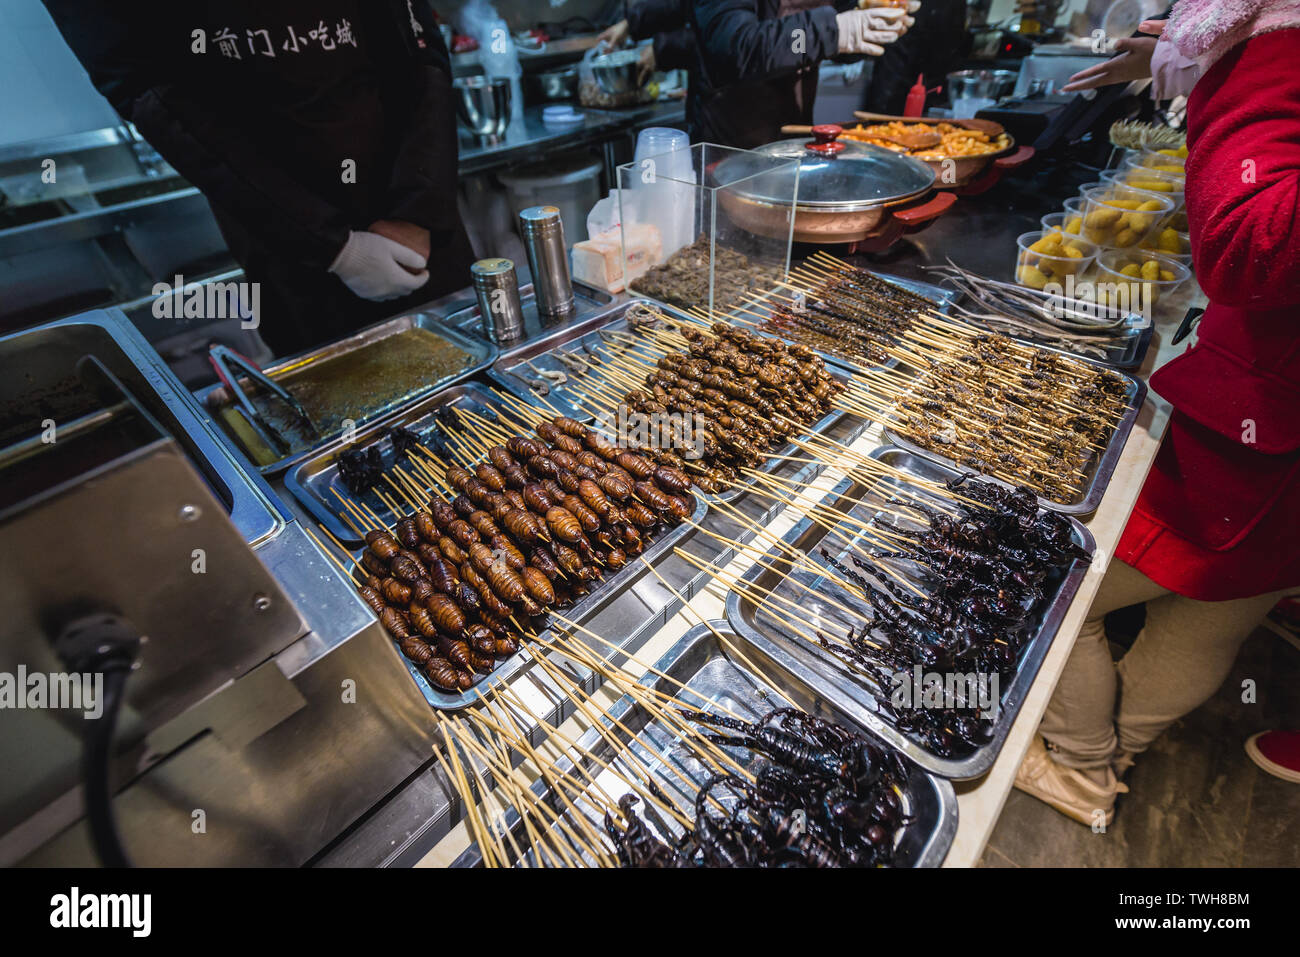 Silkworms and scorpions in indoor food stand on Qianmen Street in Beijing, China Stock Photo